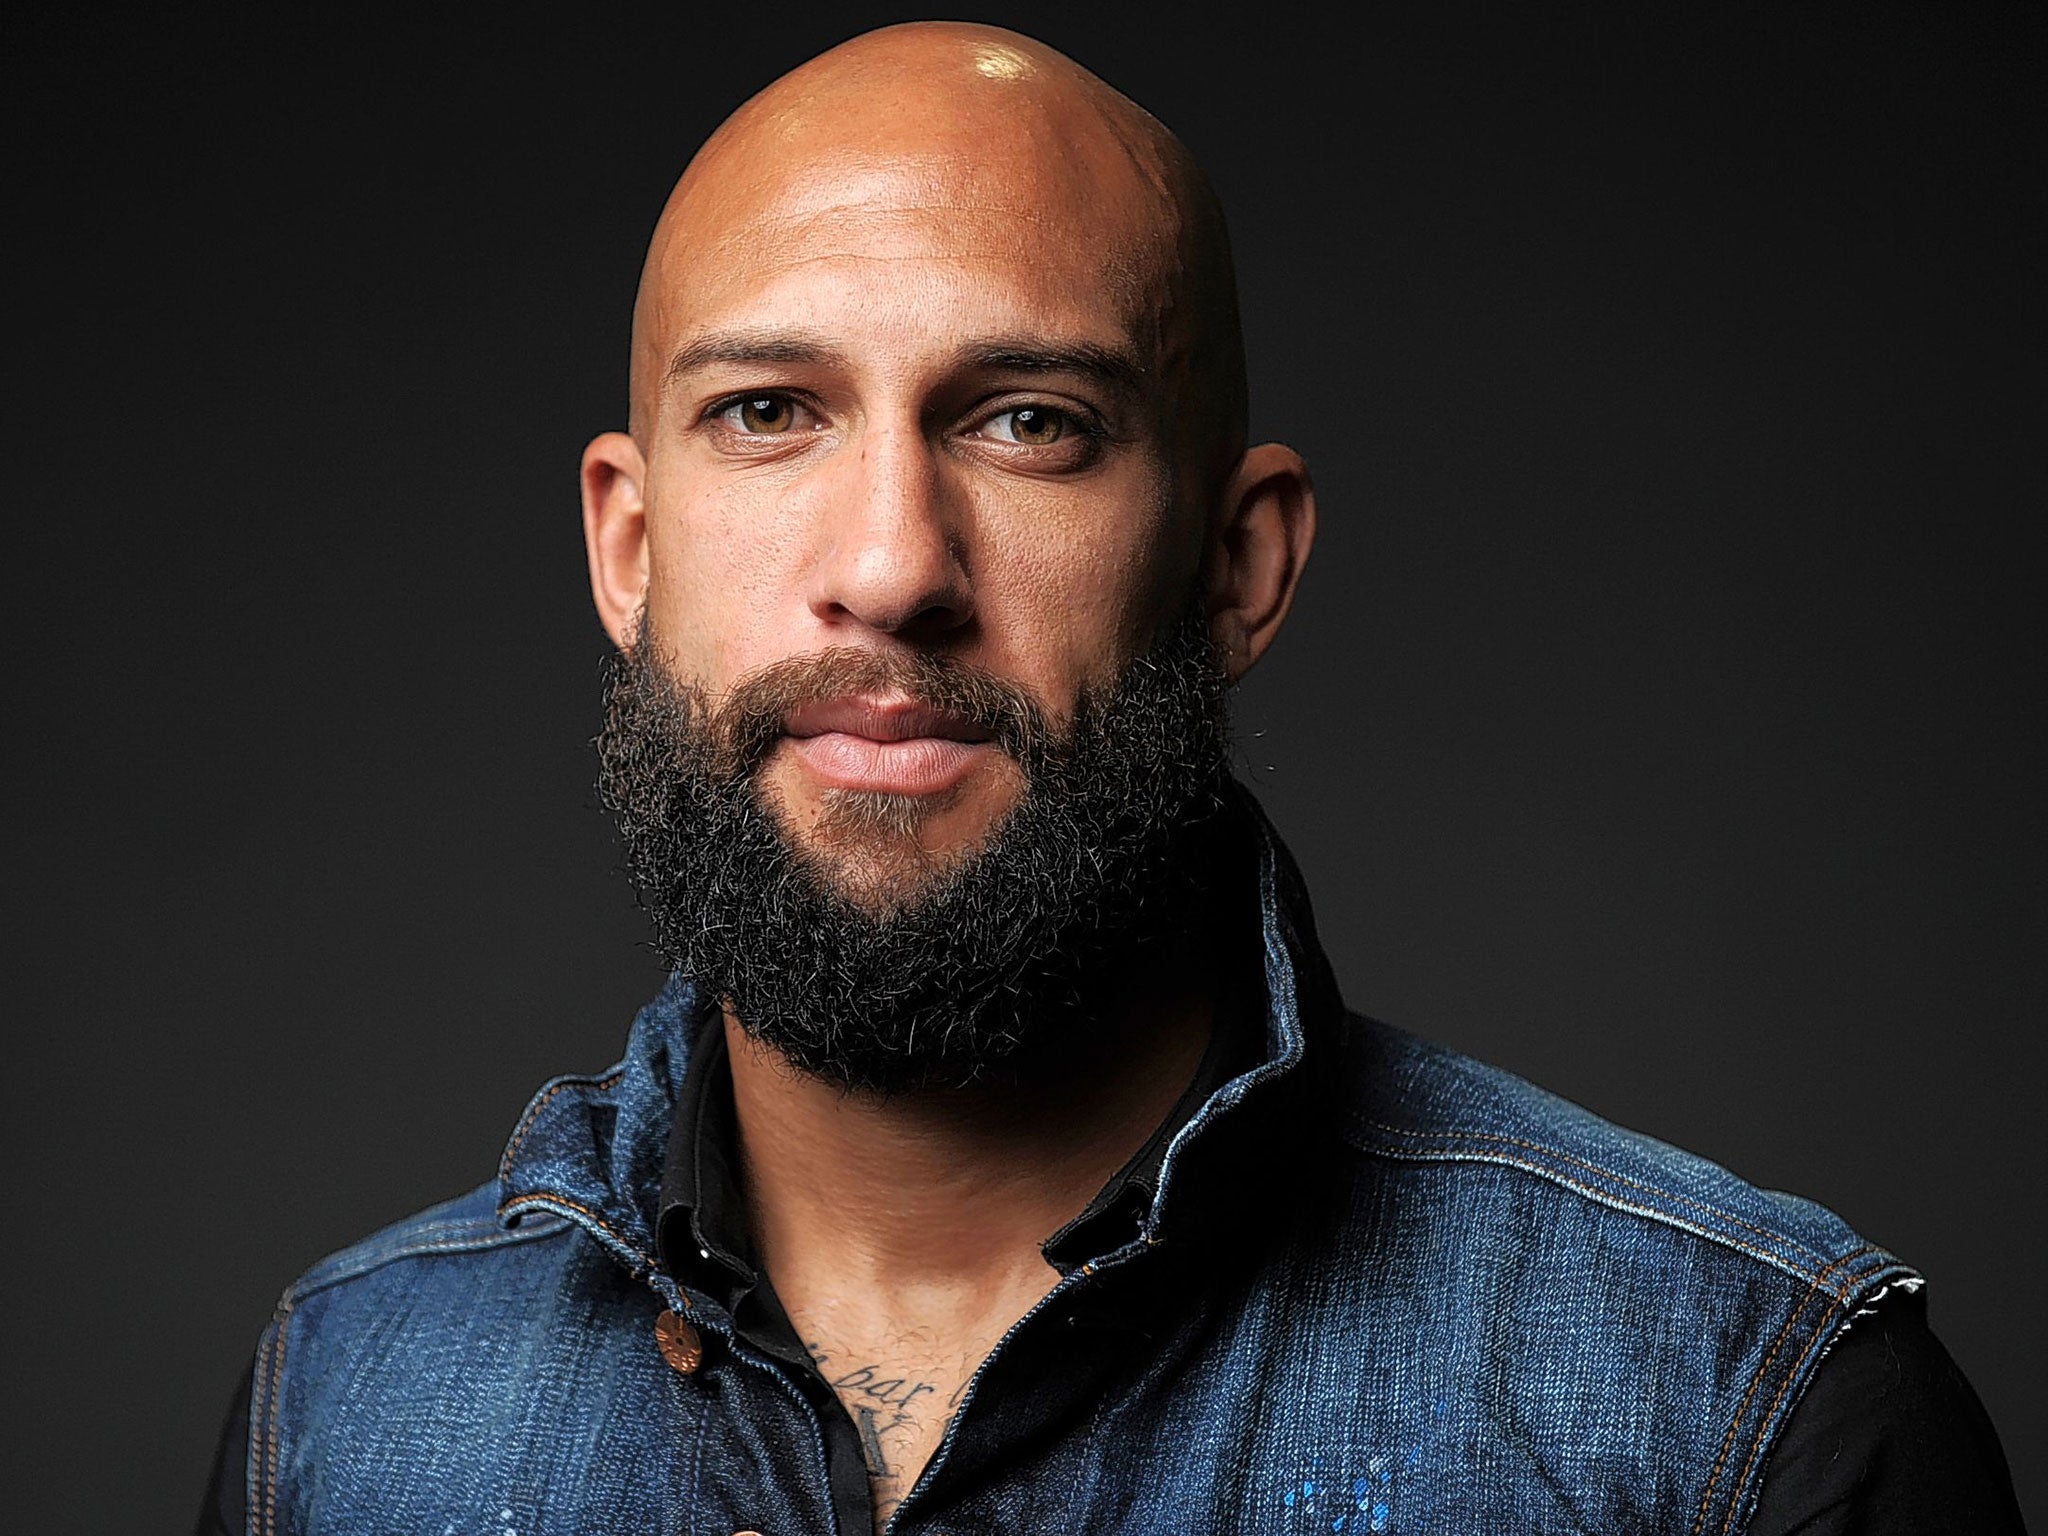 Tim Howard, the Everton goalkeeper, will be trying to repeat last season’s victory over Arsenal